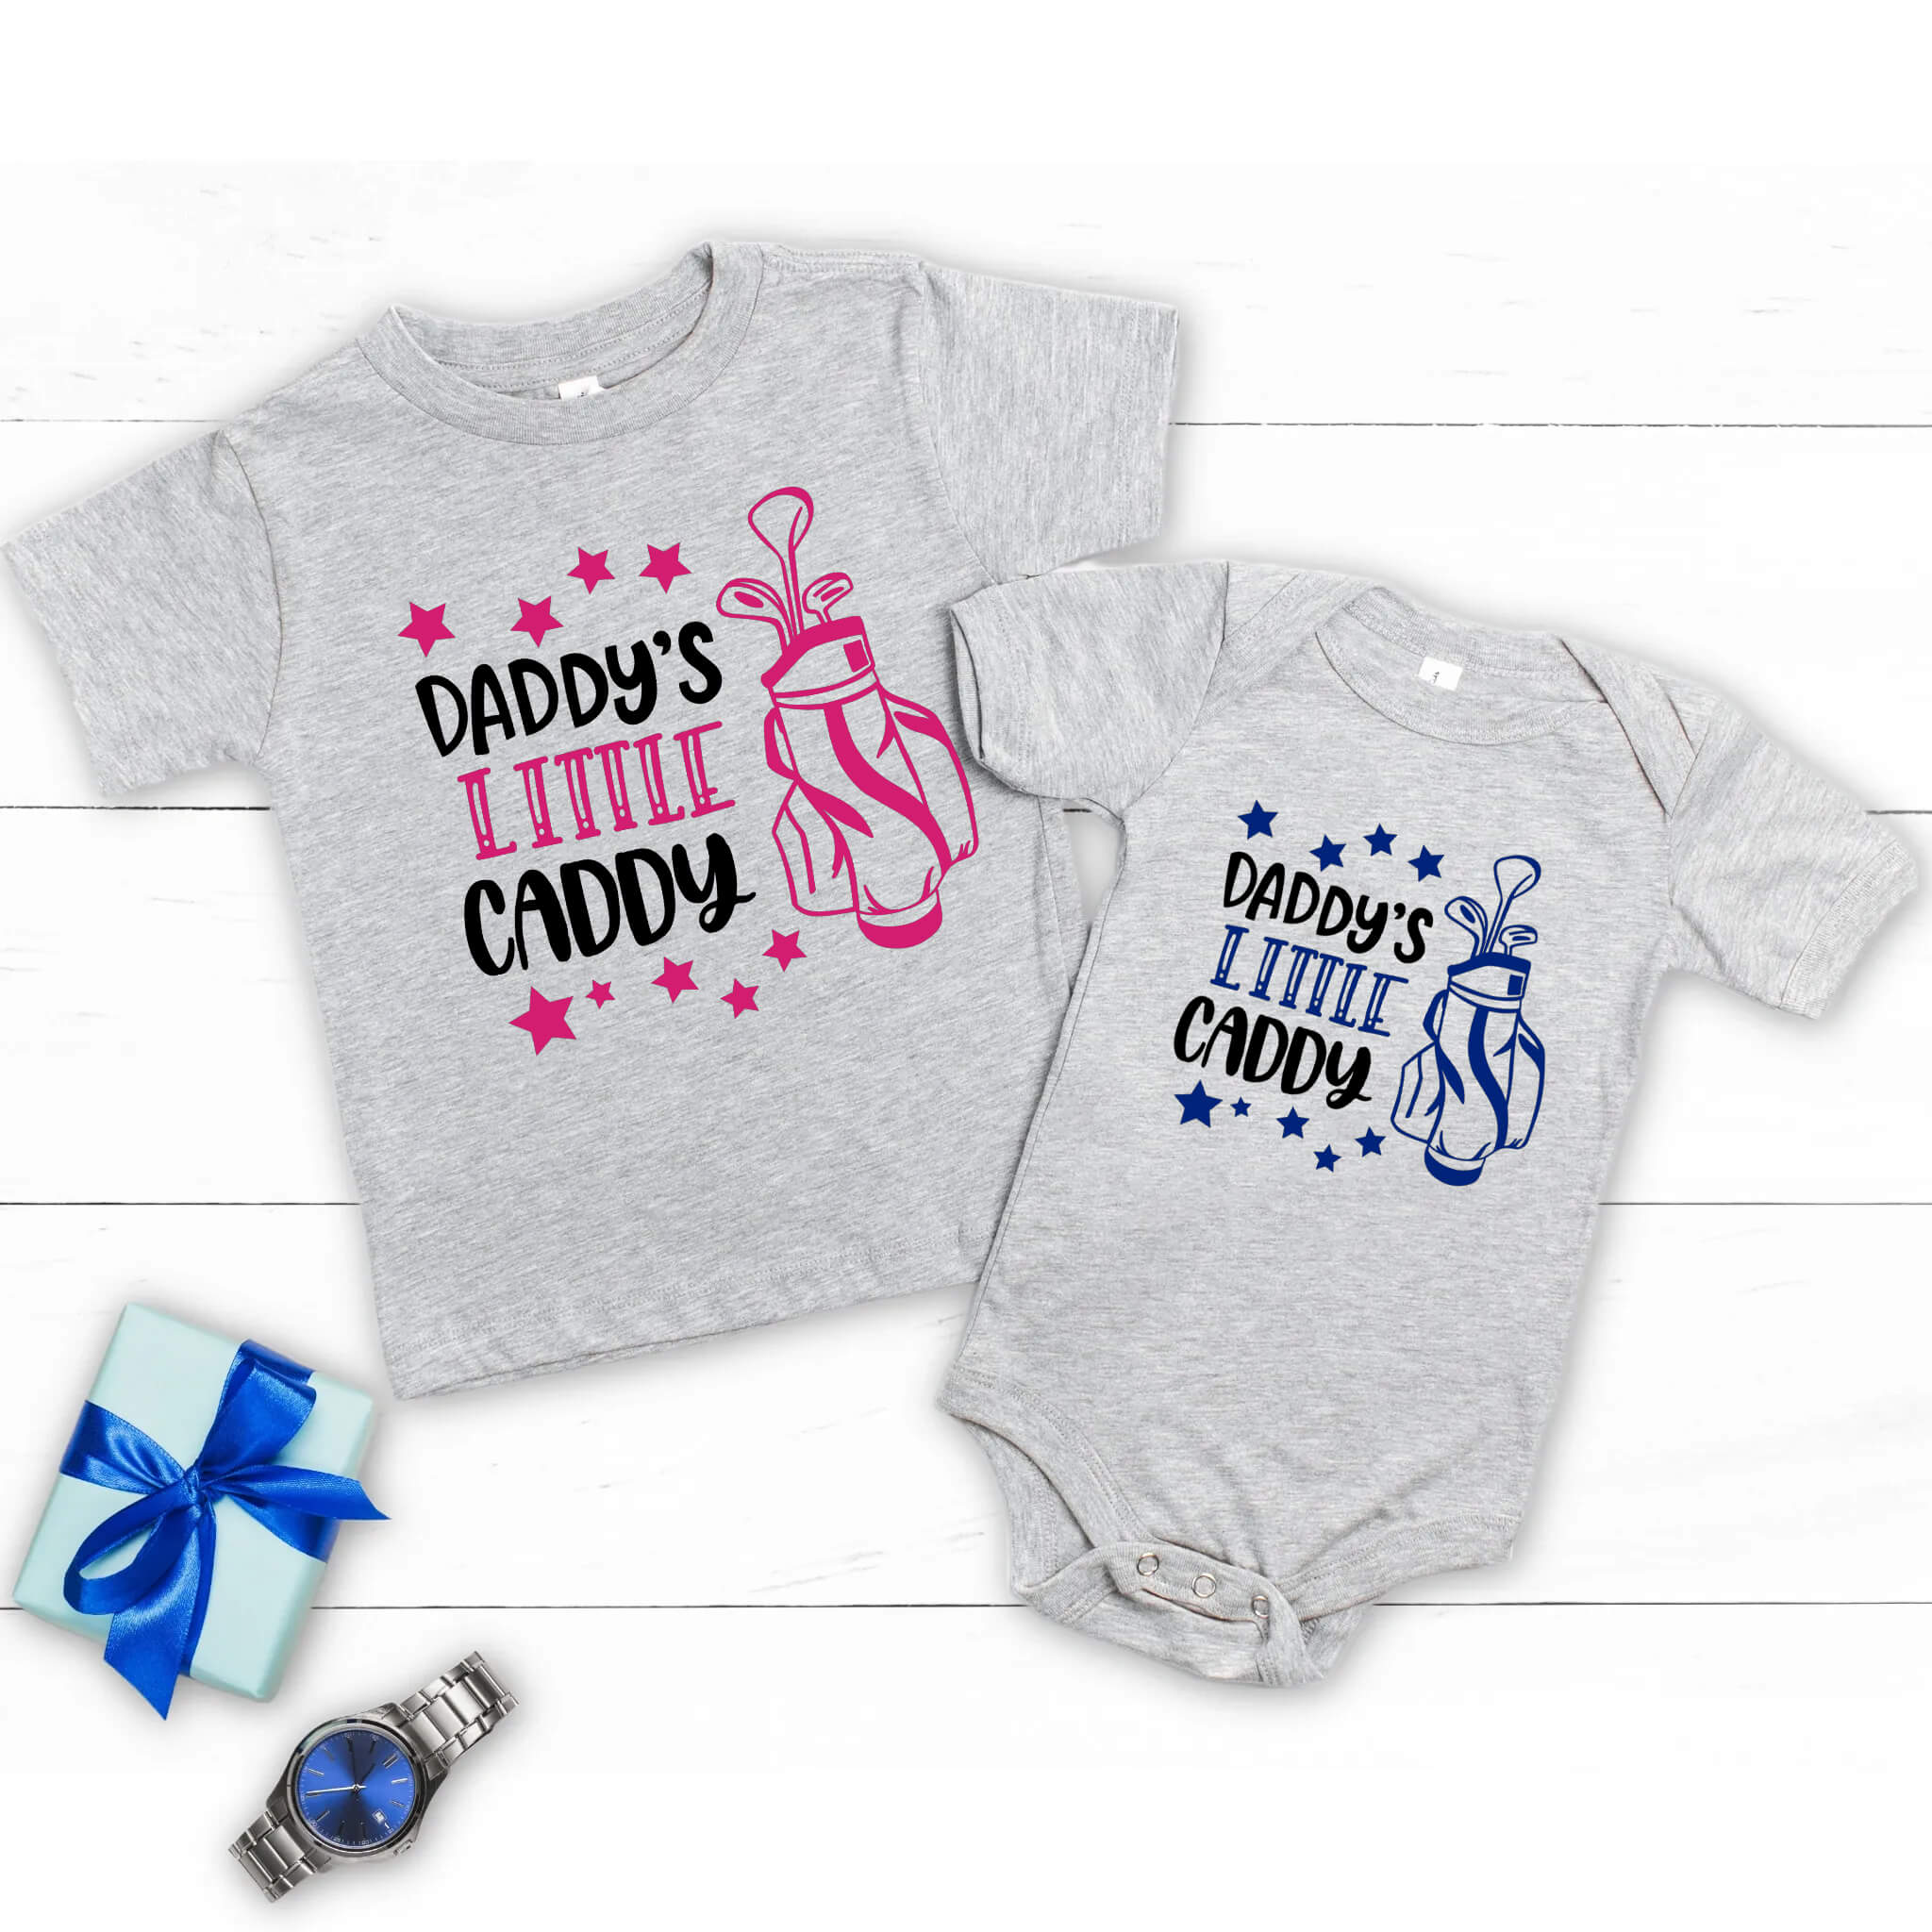 Daddy's Little Caddy Baby Onesie Boy's Girl's T-Shirt Birthday Christmas Father's Day Shower Gift